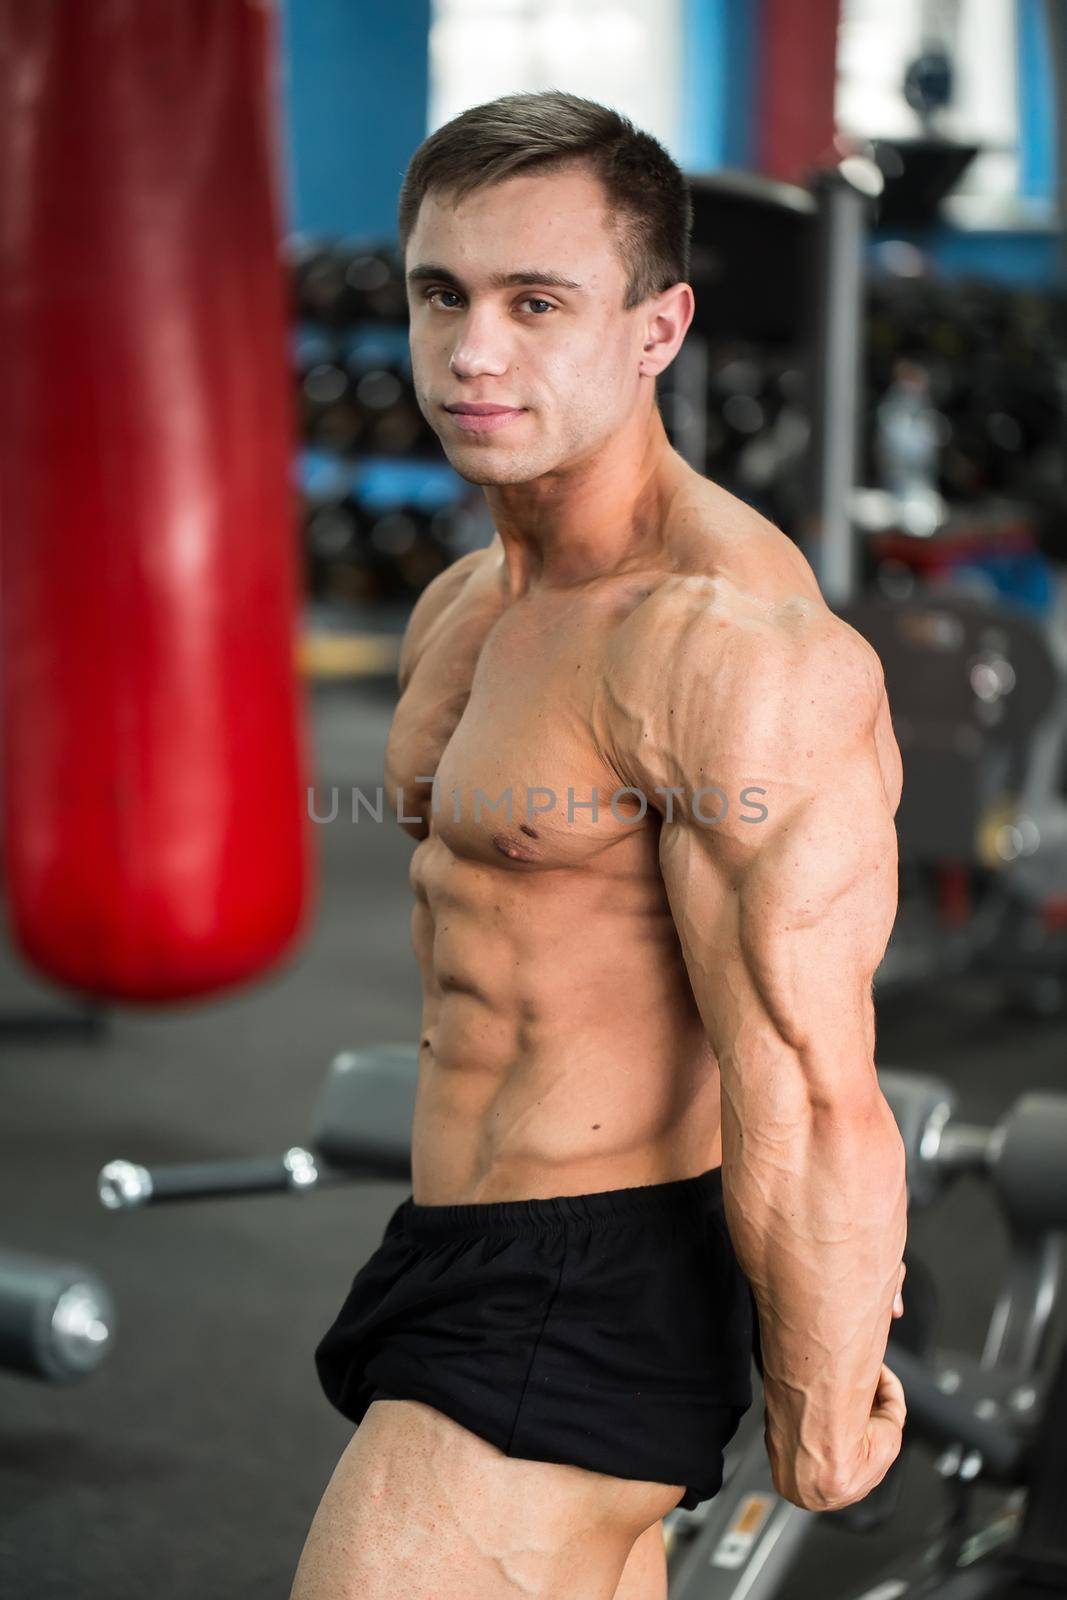 detail of a bodybuilder posing in the gym: side chest. by StudioPeace